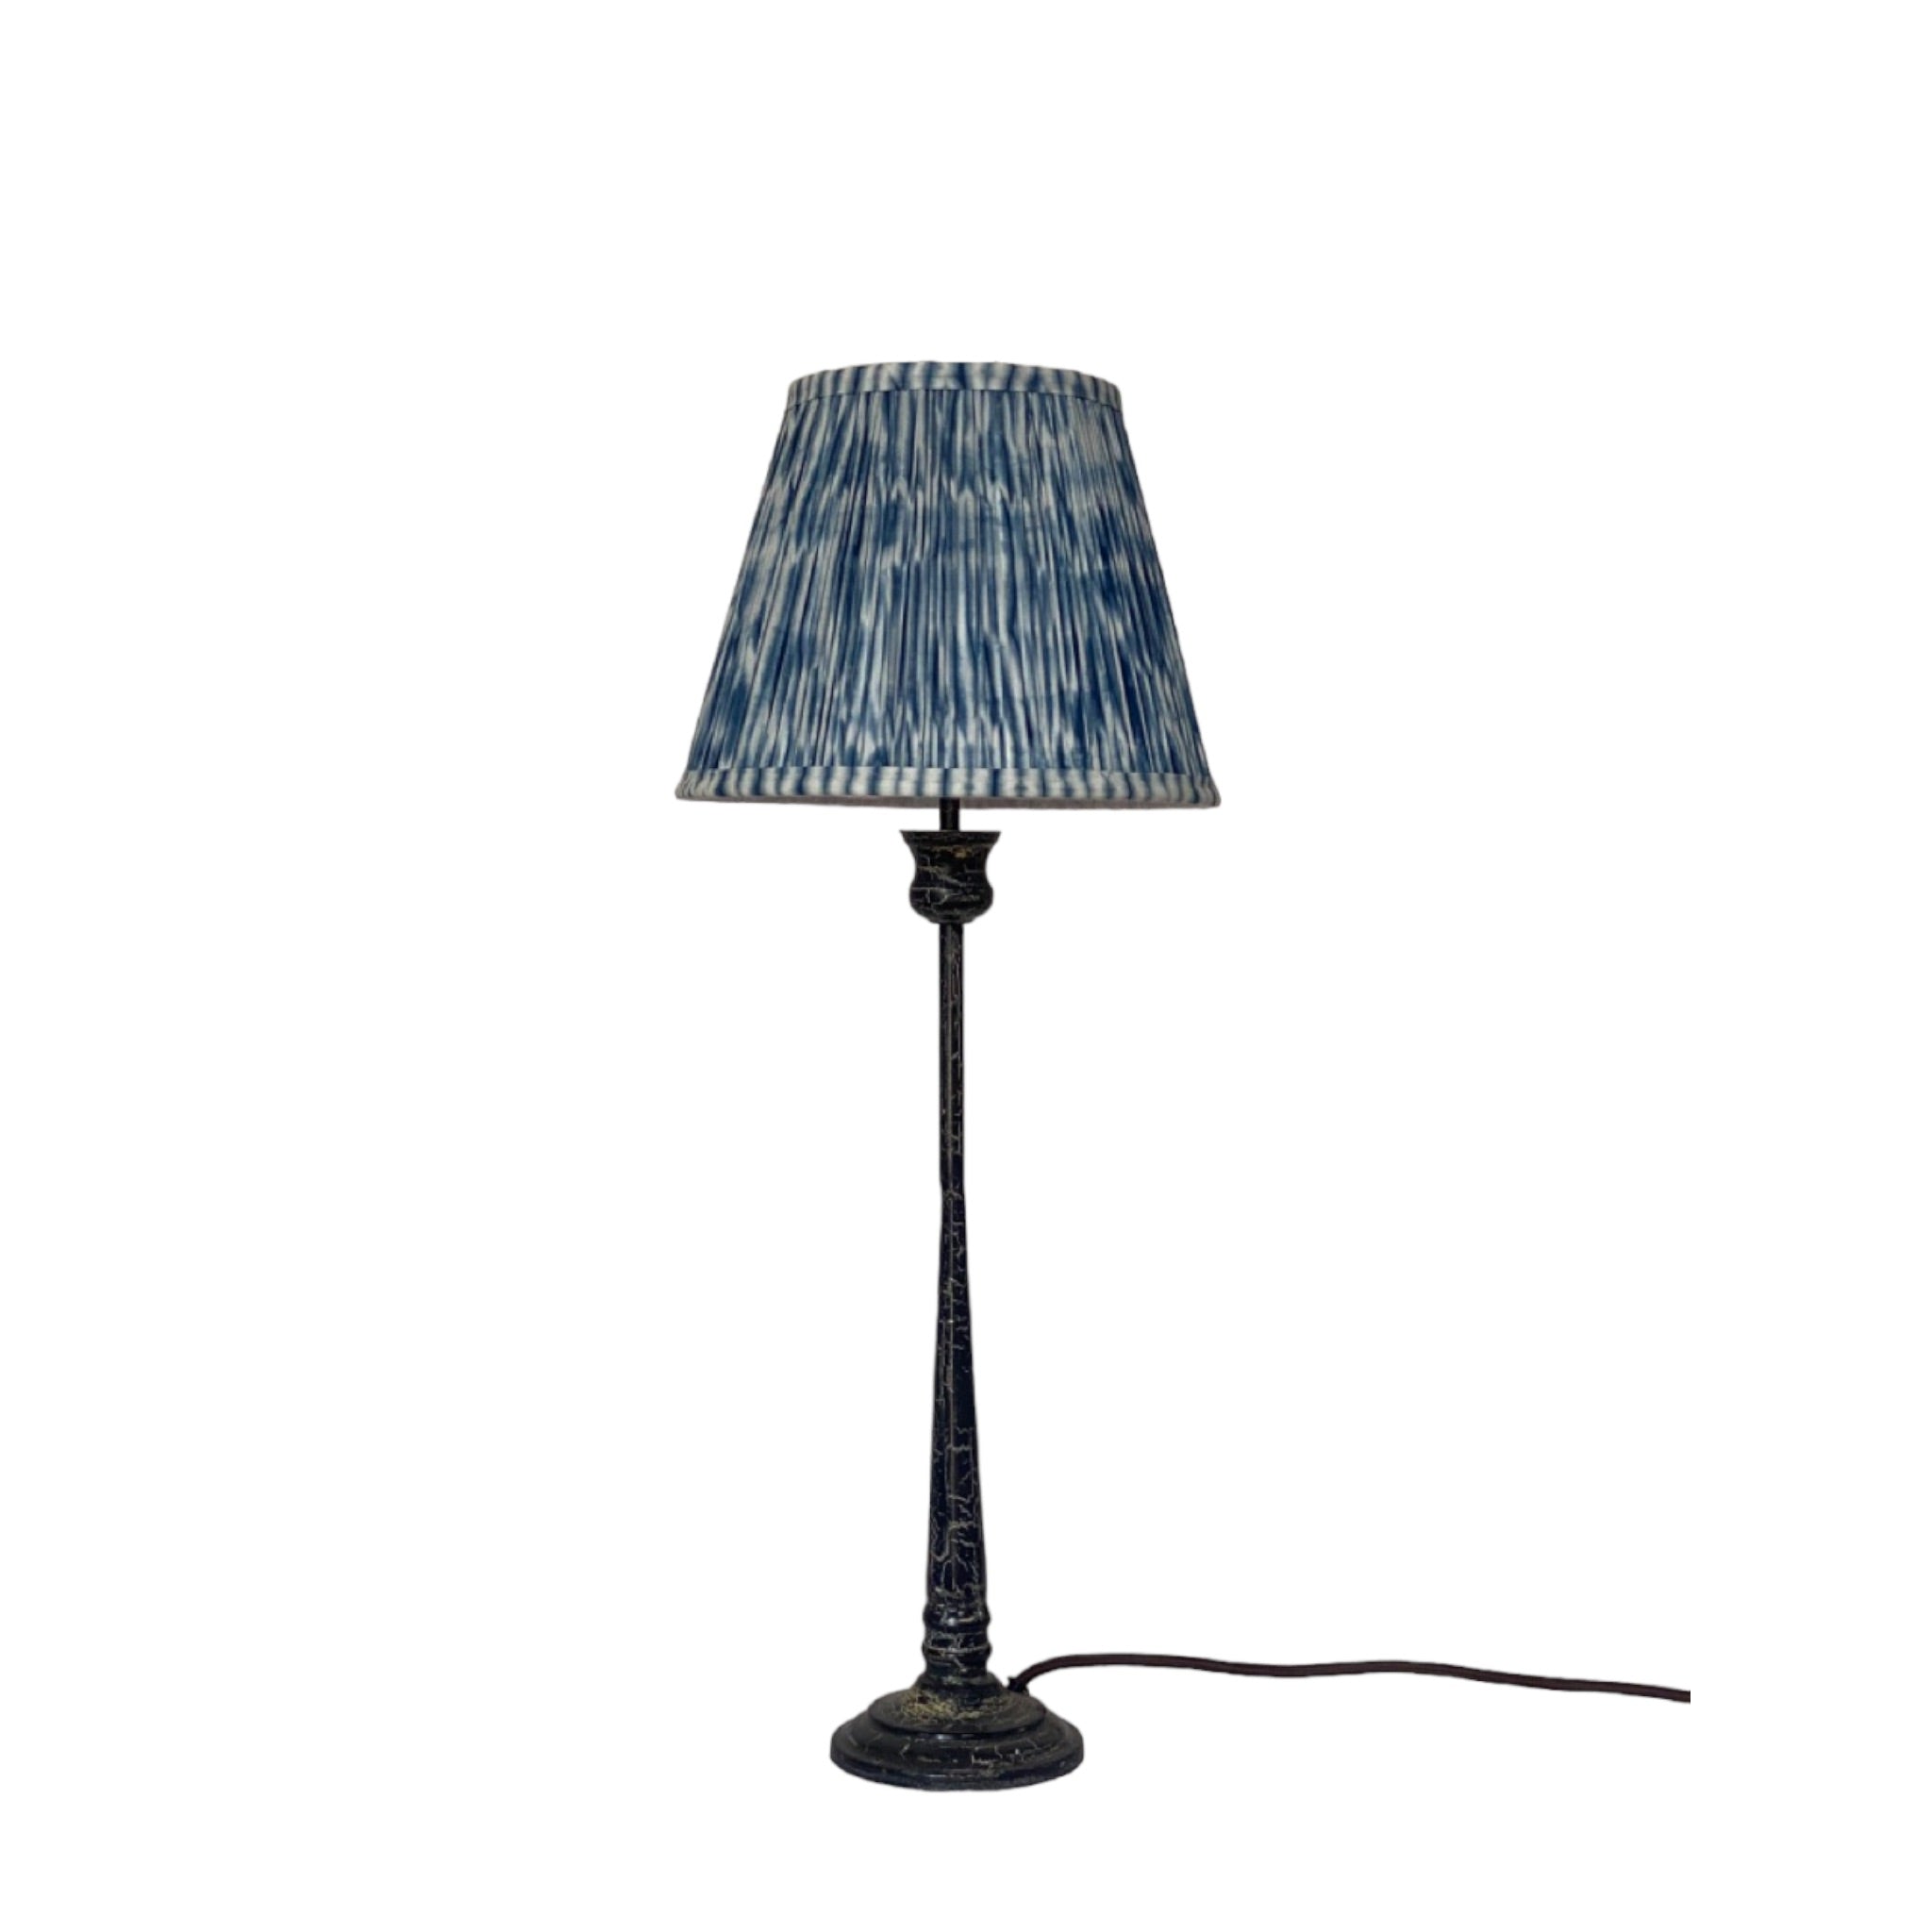 Patala Candlestick Table Lamp